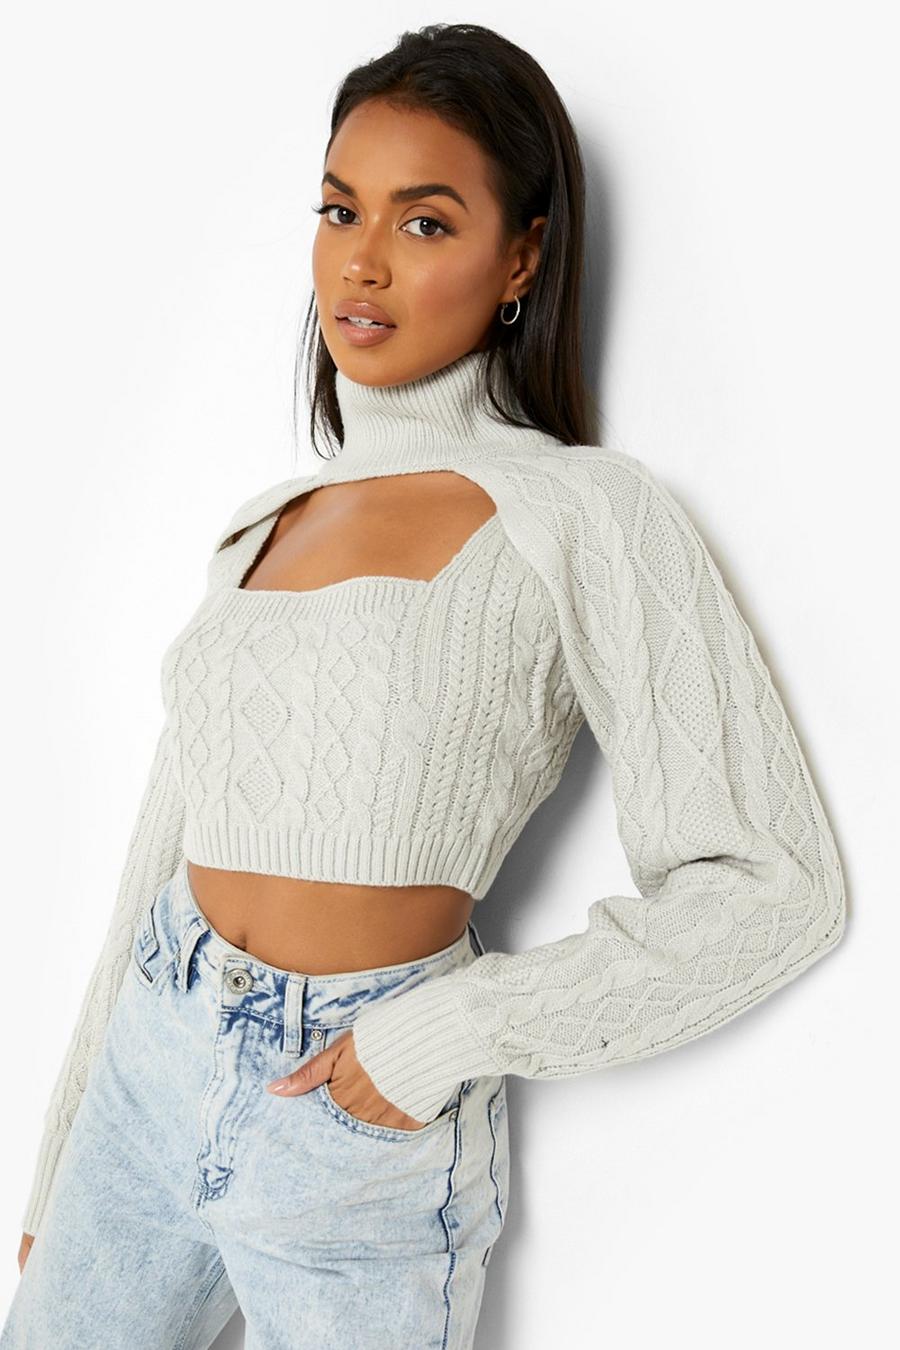 Grey Cable Knit Bralet And Arm Warmer Co-ord